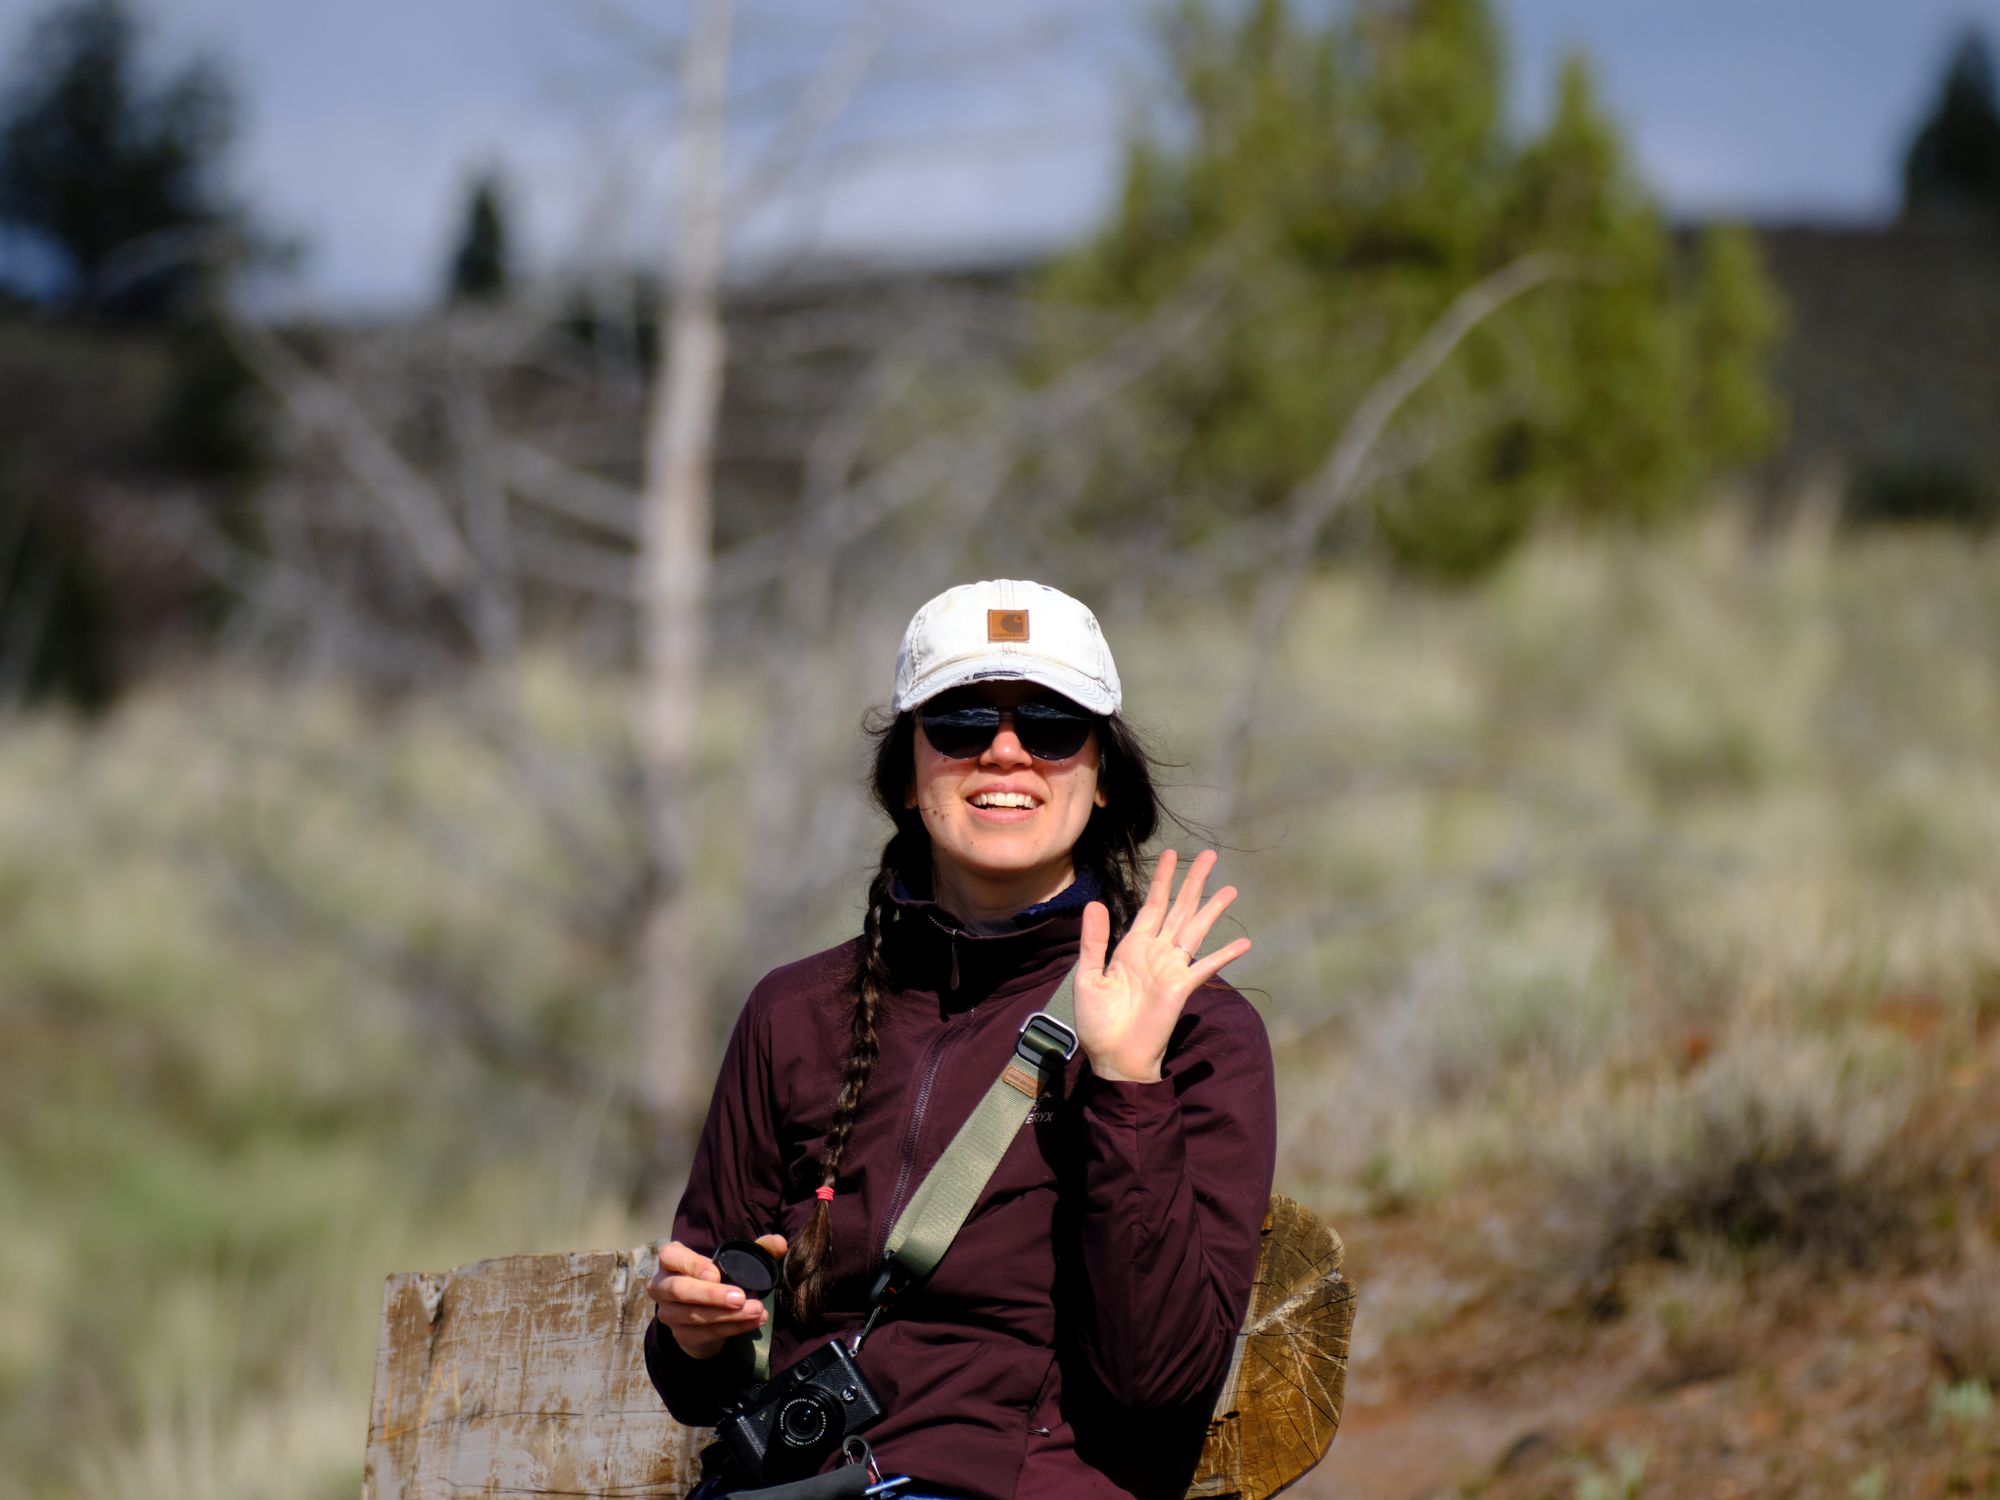 image of Cassandra wearing baseball cap with long brown-haired braid, she's wearing purple jacket and has her left hand up frozen in an open palmed wave at Nathan who's taking the photo. She has a lens cap in her other hand and a small camera strapped around her as she sits on a bench with a blurry high desert background.